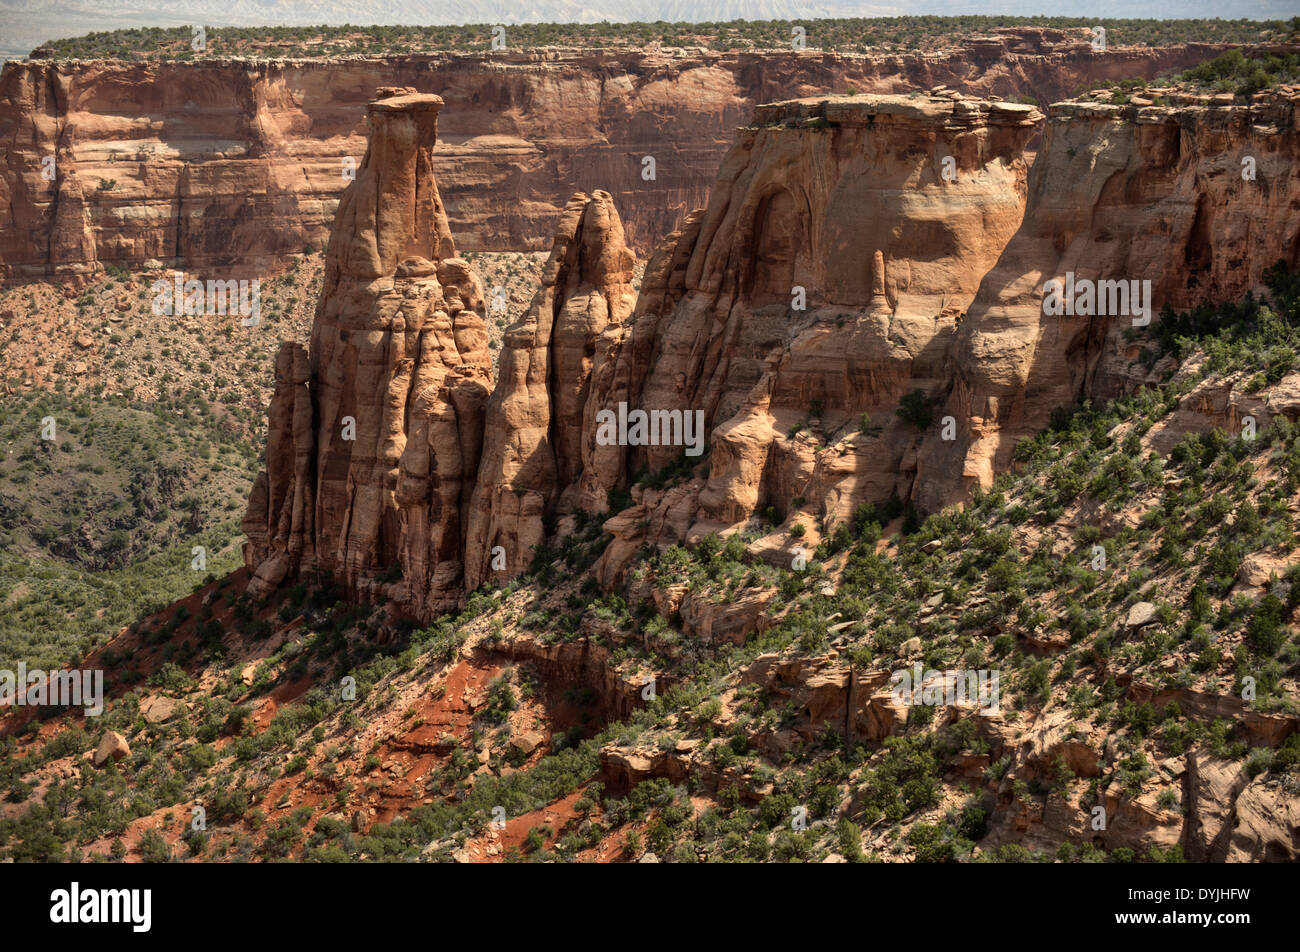 The Kissing Couple, left, among other, unnamed spires and columns in the Colorado National Monument Stock Photo